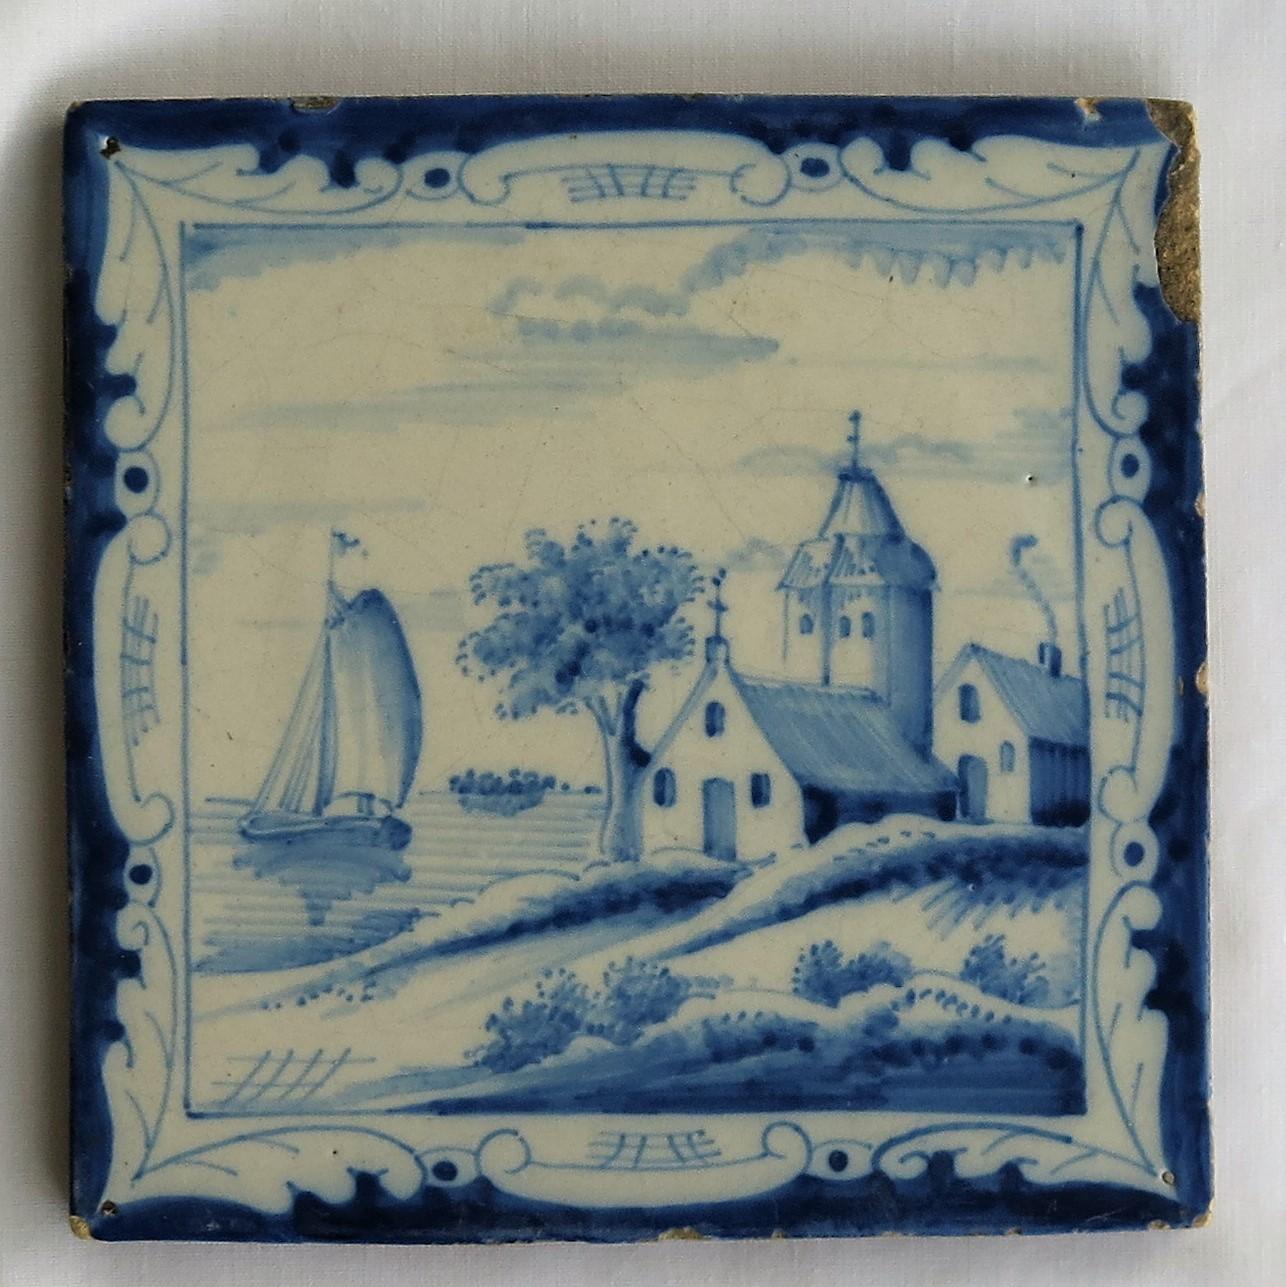 Dutch Colonial FOUR Individual Ceramic Delft Wall Tiles Hand Painted, 19th Century For Sale